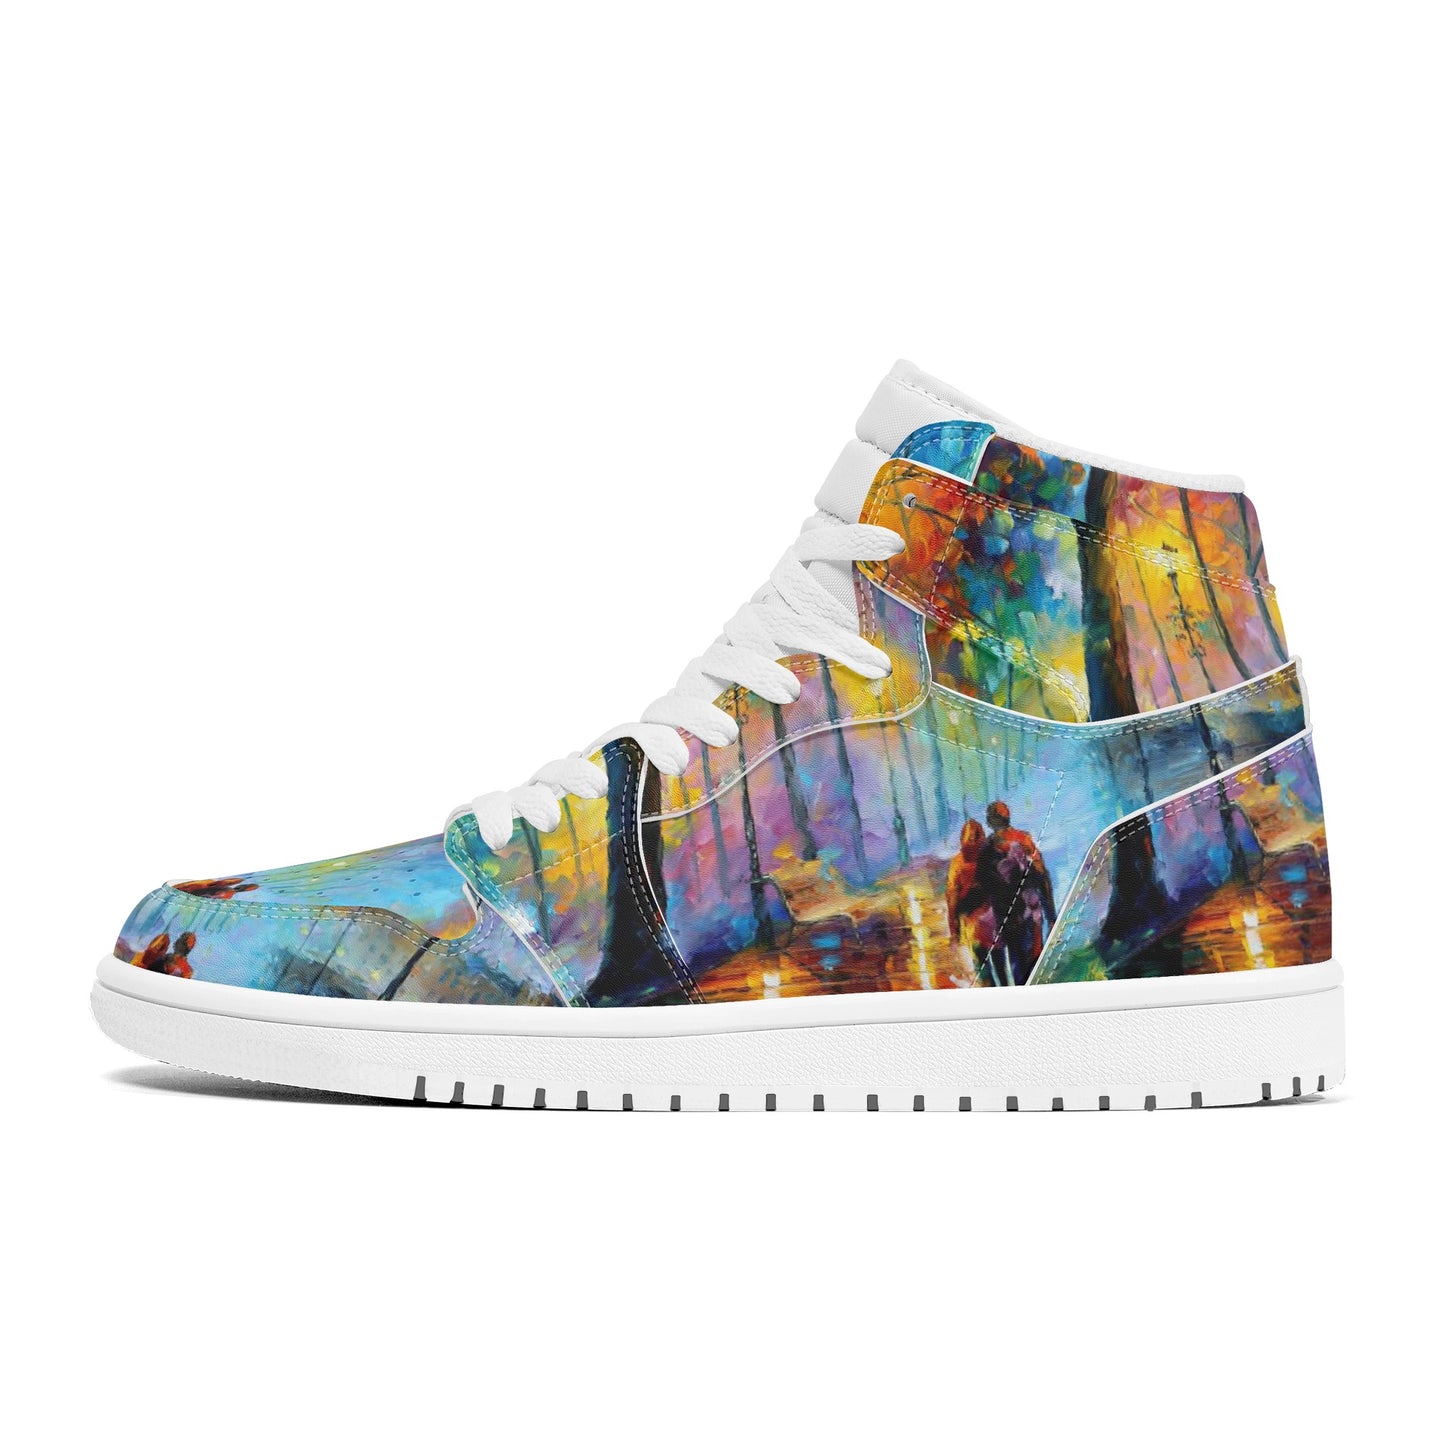 Women's High Top Skateboard Sneakers Afremov Melody of The Night